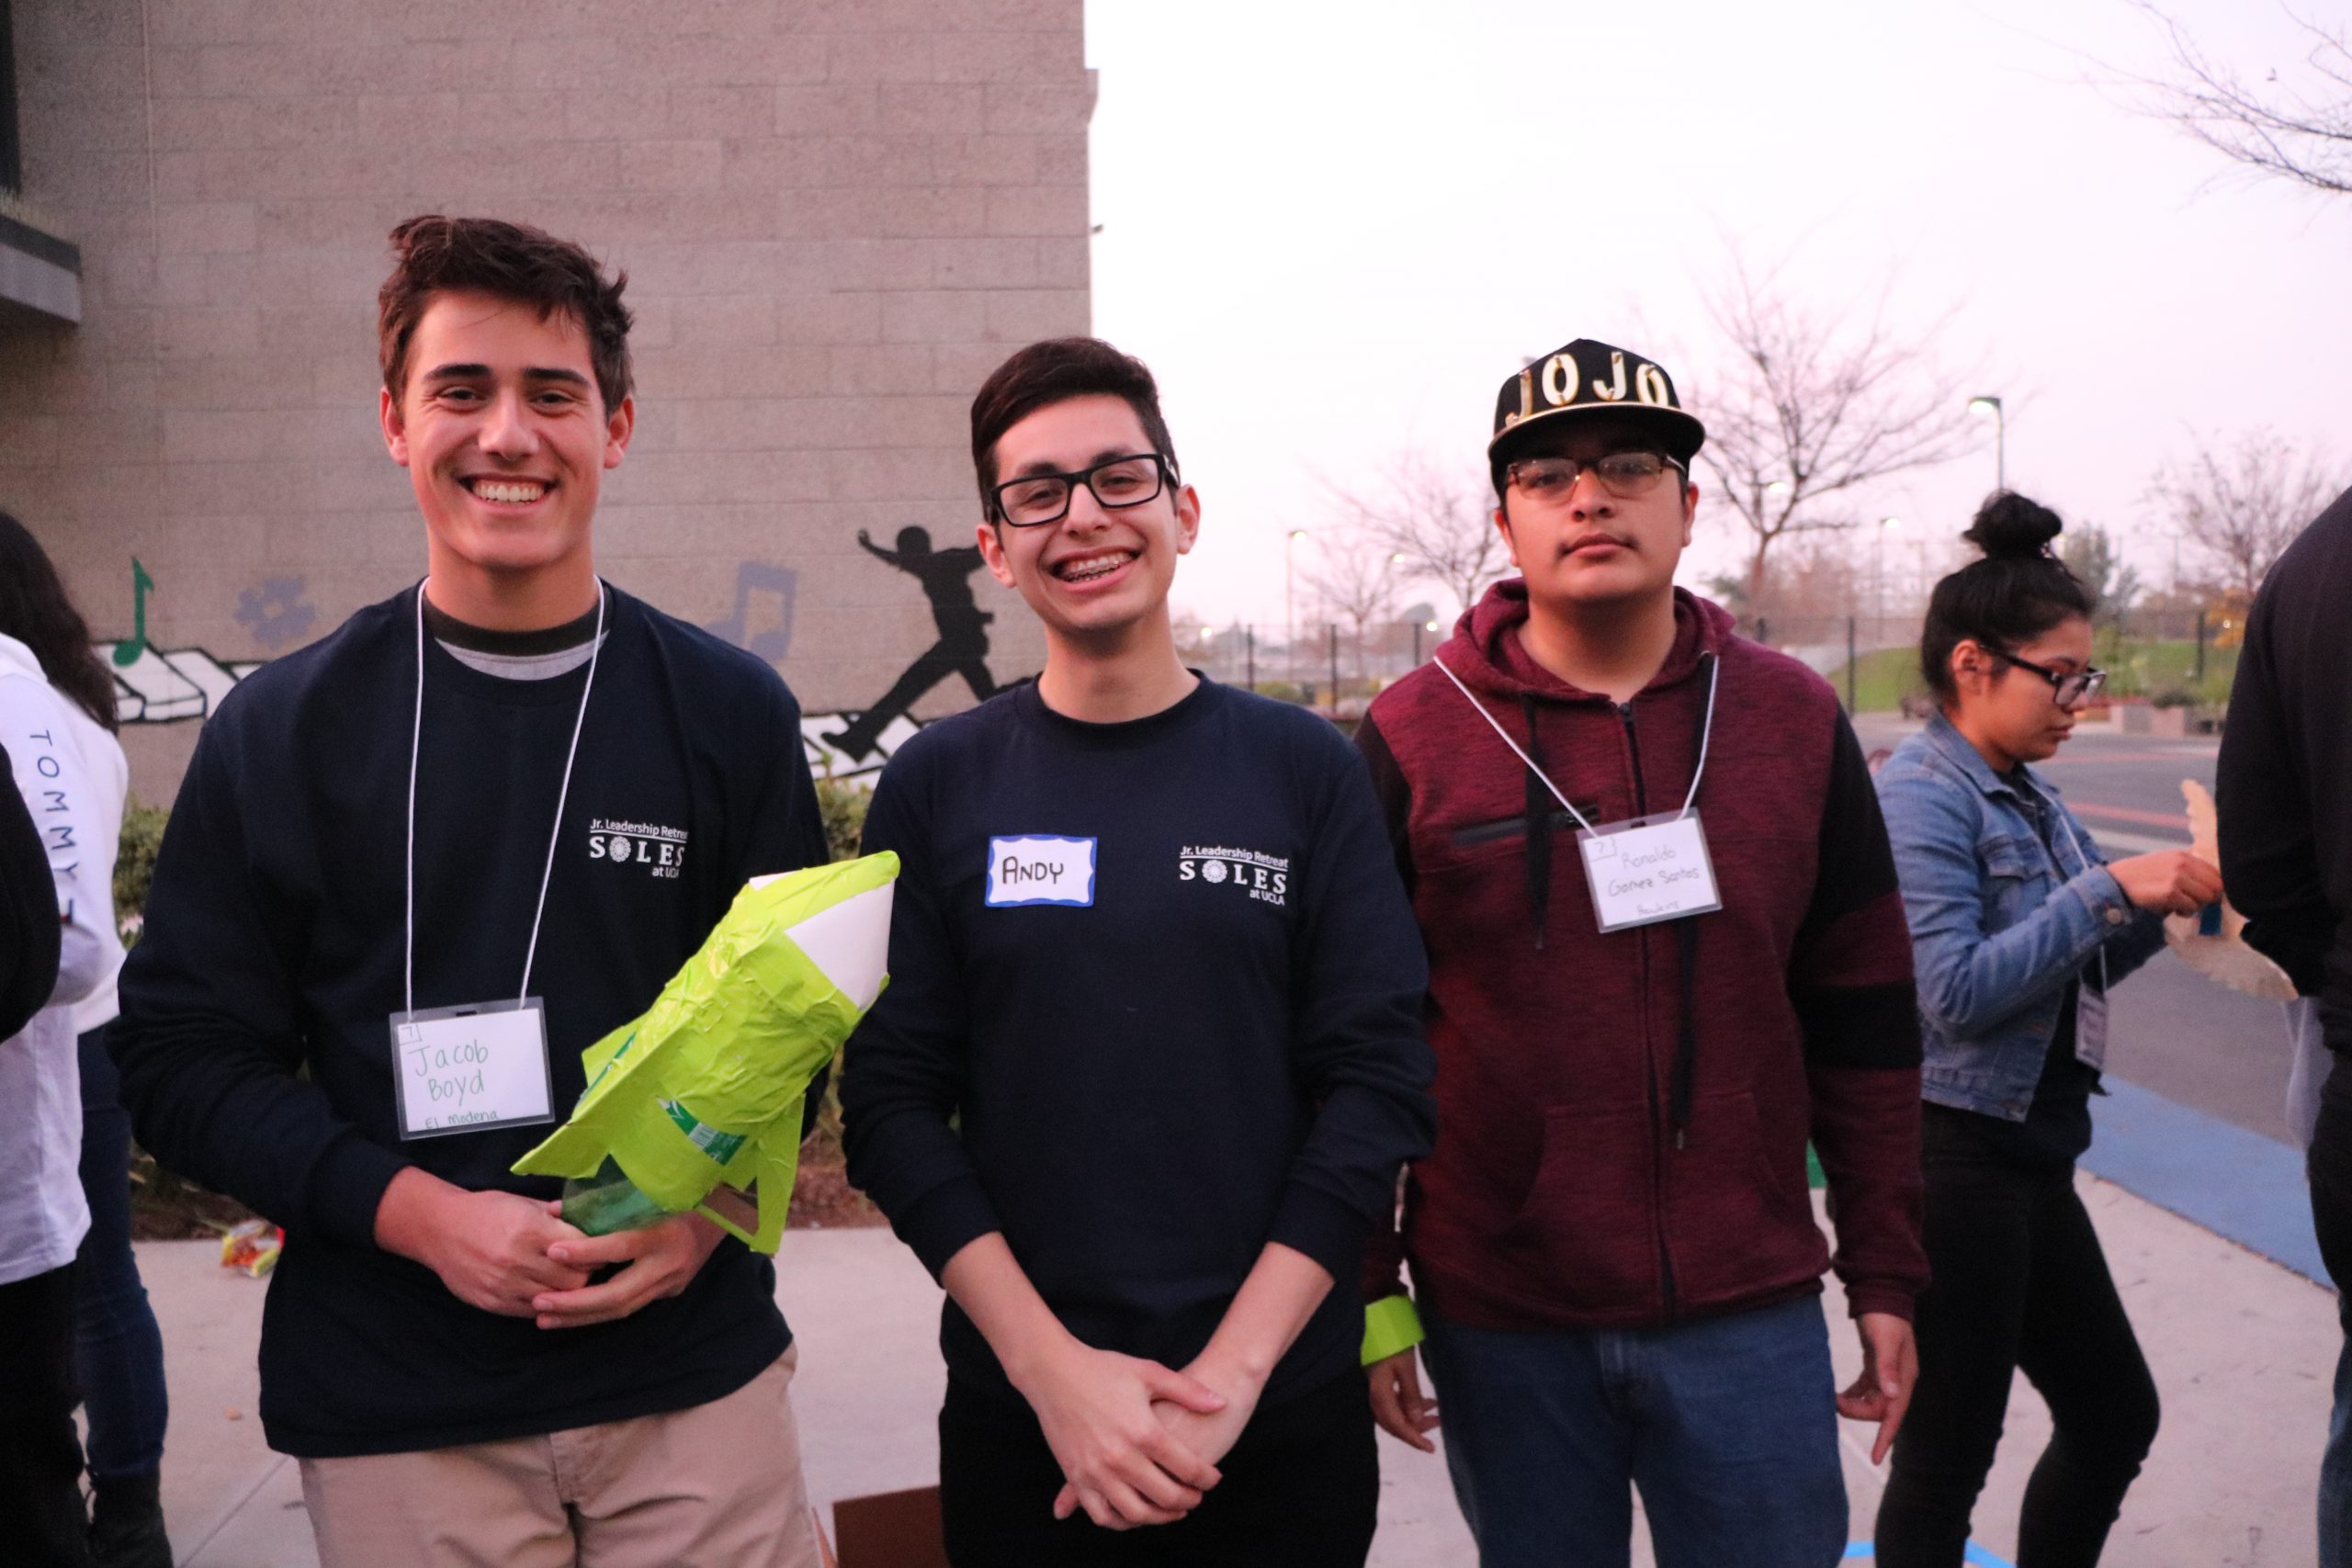 SOLES member Andy Muratalla poses with SHPE Jr. chapter members during Leadershpe Junior event.